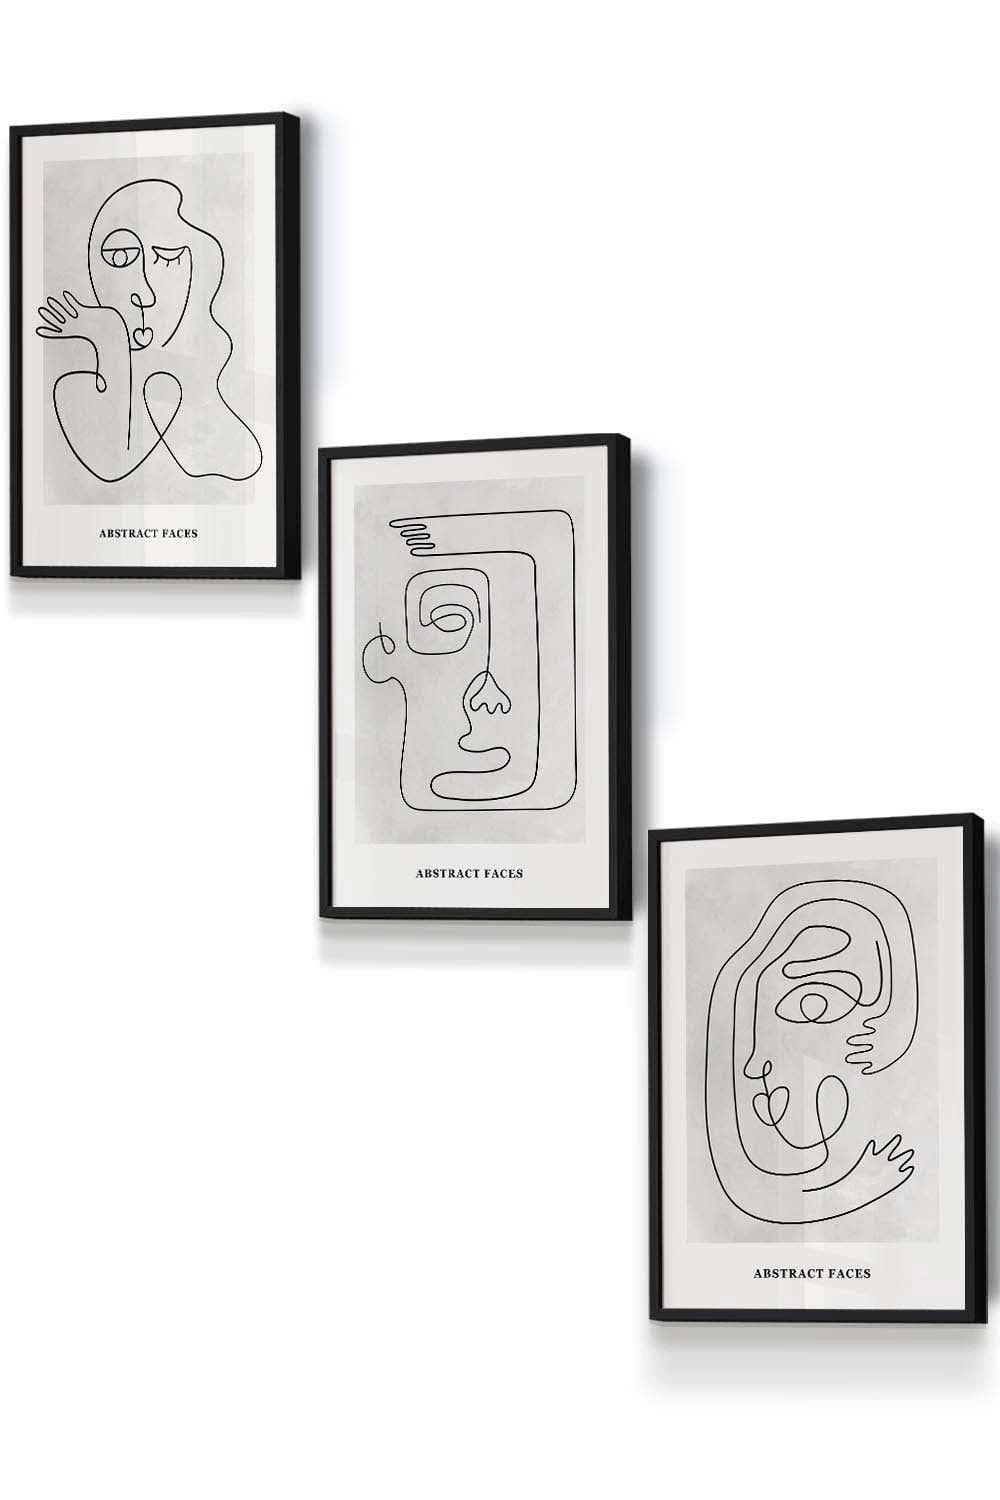 Set of 3 Black Framed Grey Abstract Line Art Faces Wall Art